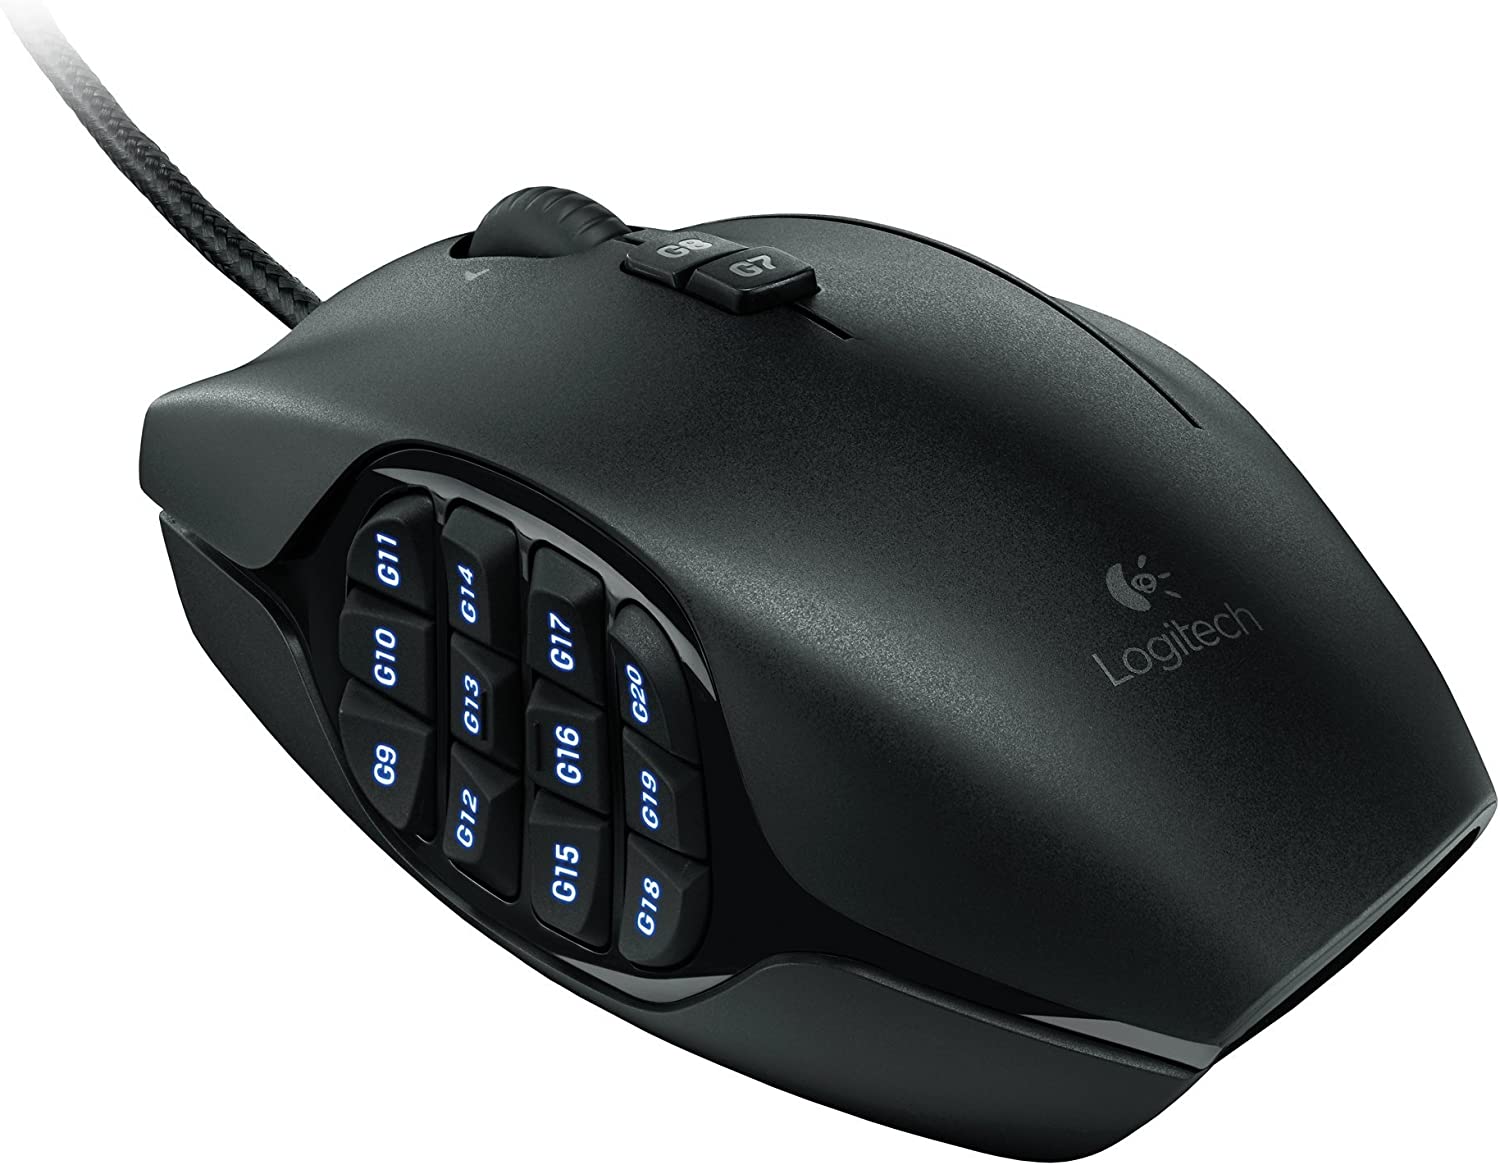 Logitech G600 MMO Wired USB Gaming Mouse (Black)